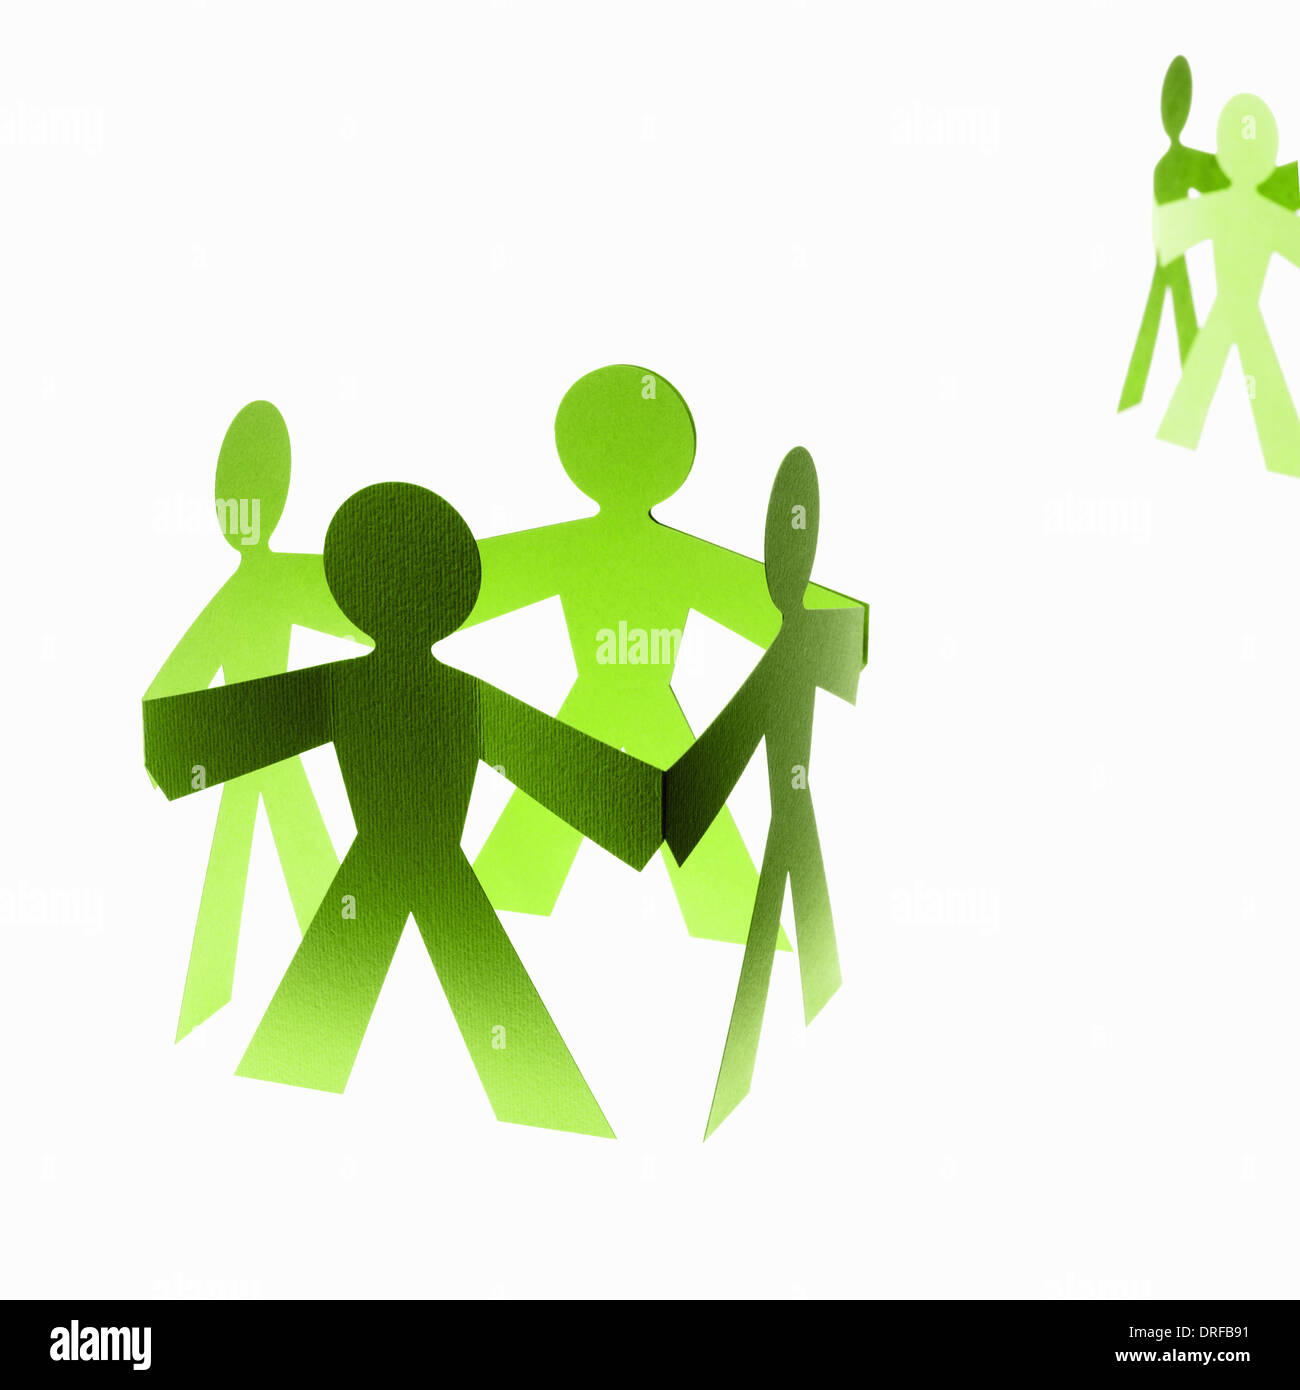 Papercuts paper cut out people with joined hands Stock Photo